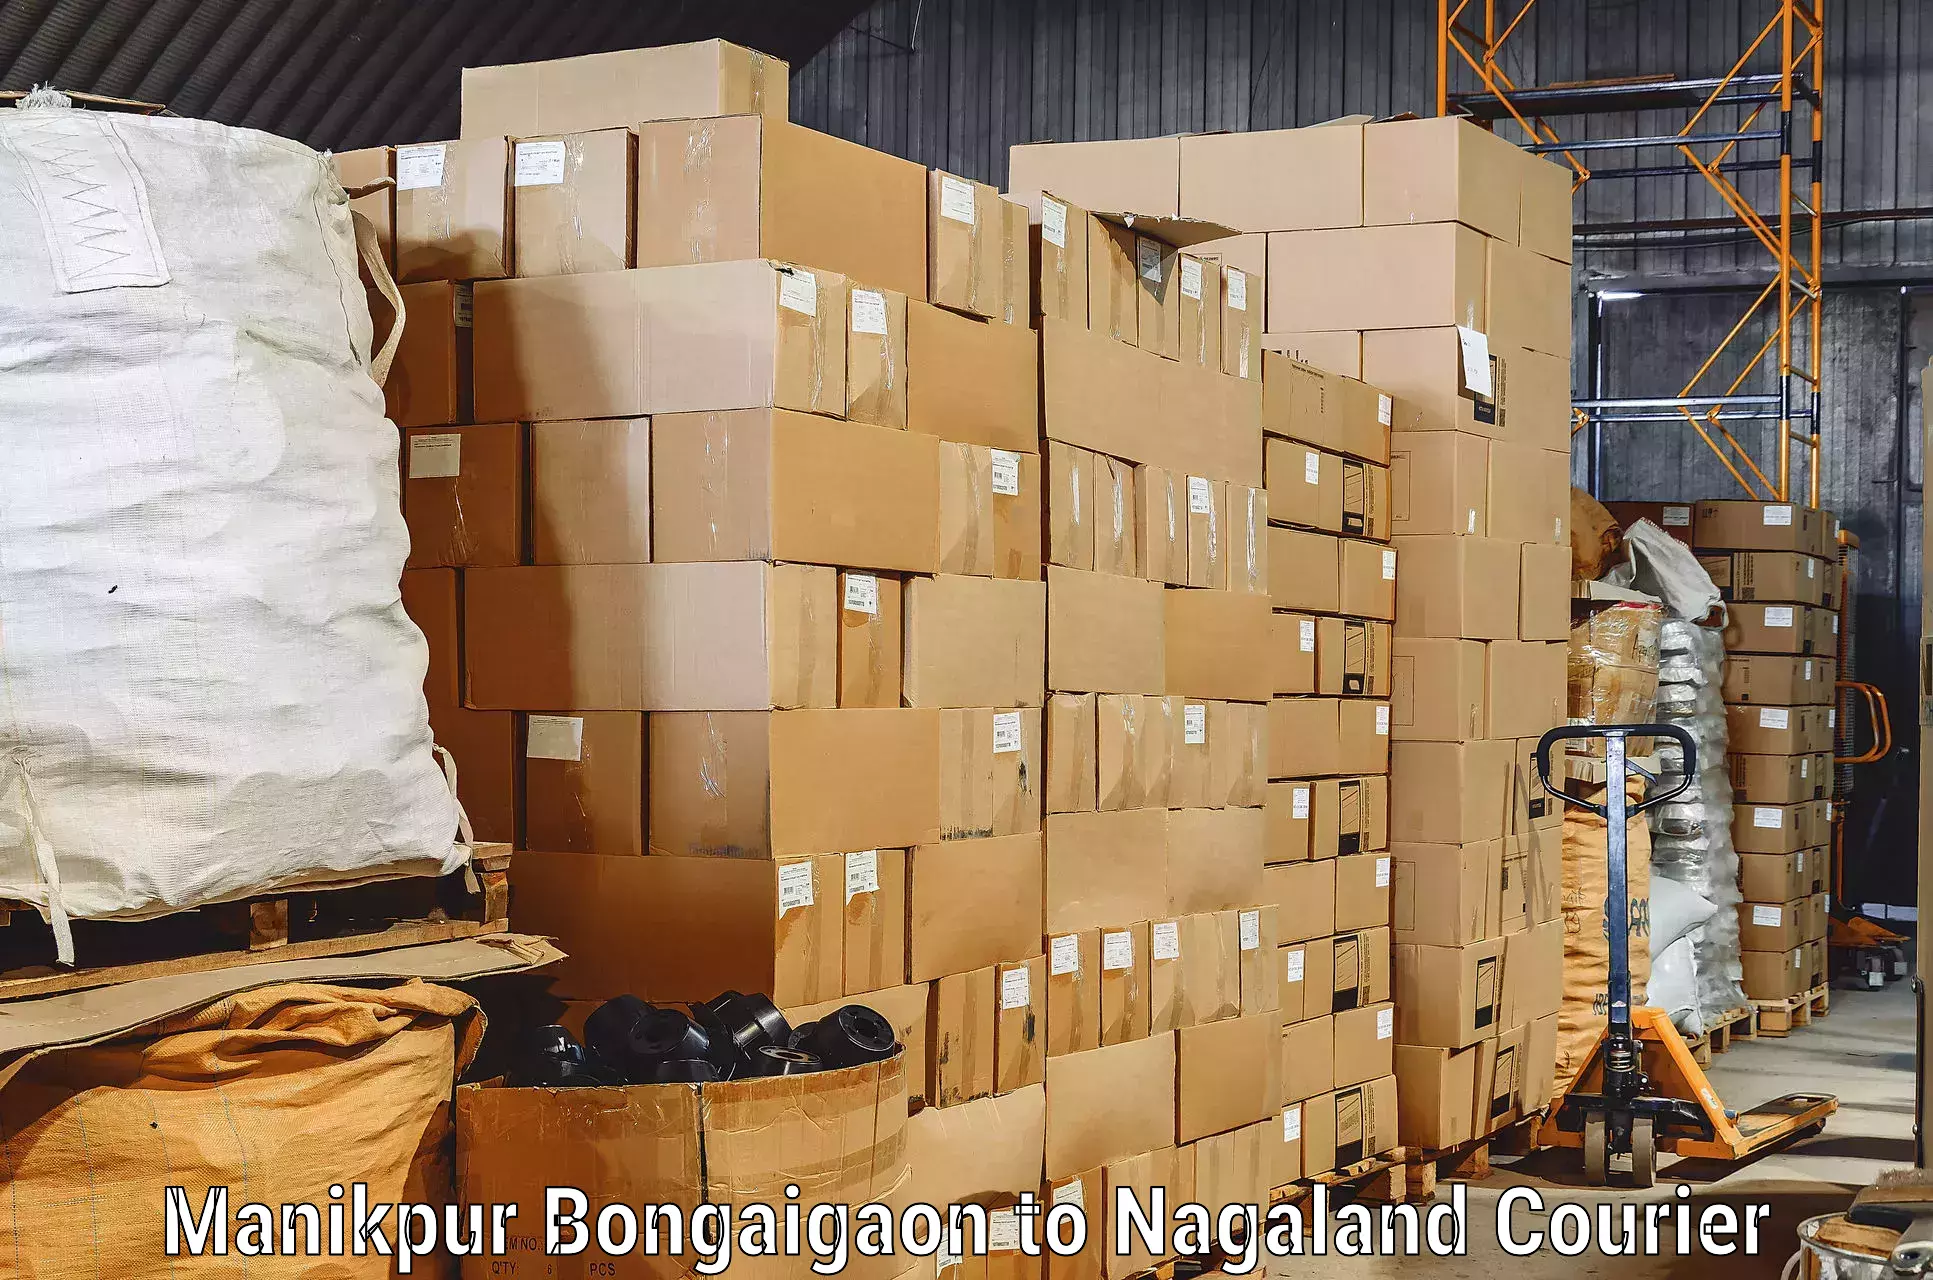 Long-distance moving services in Manikpur Bongaigaon to Dimapur